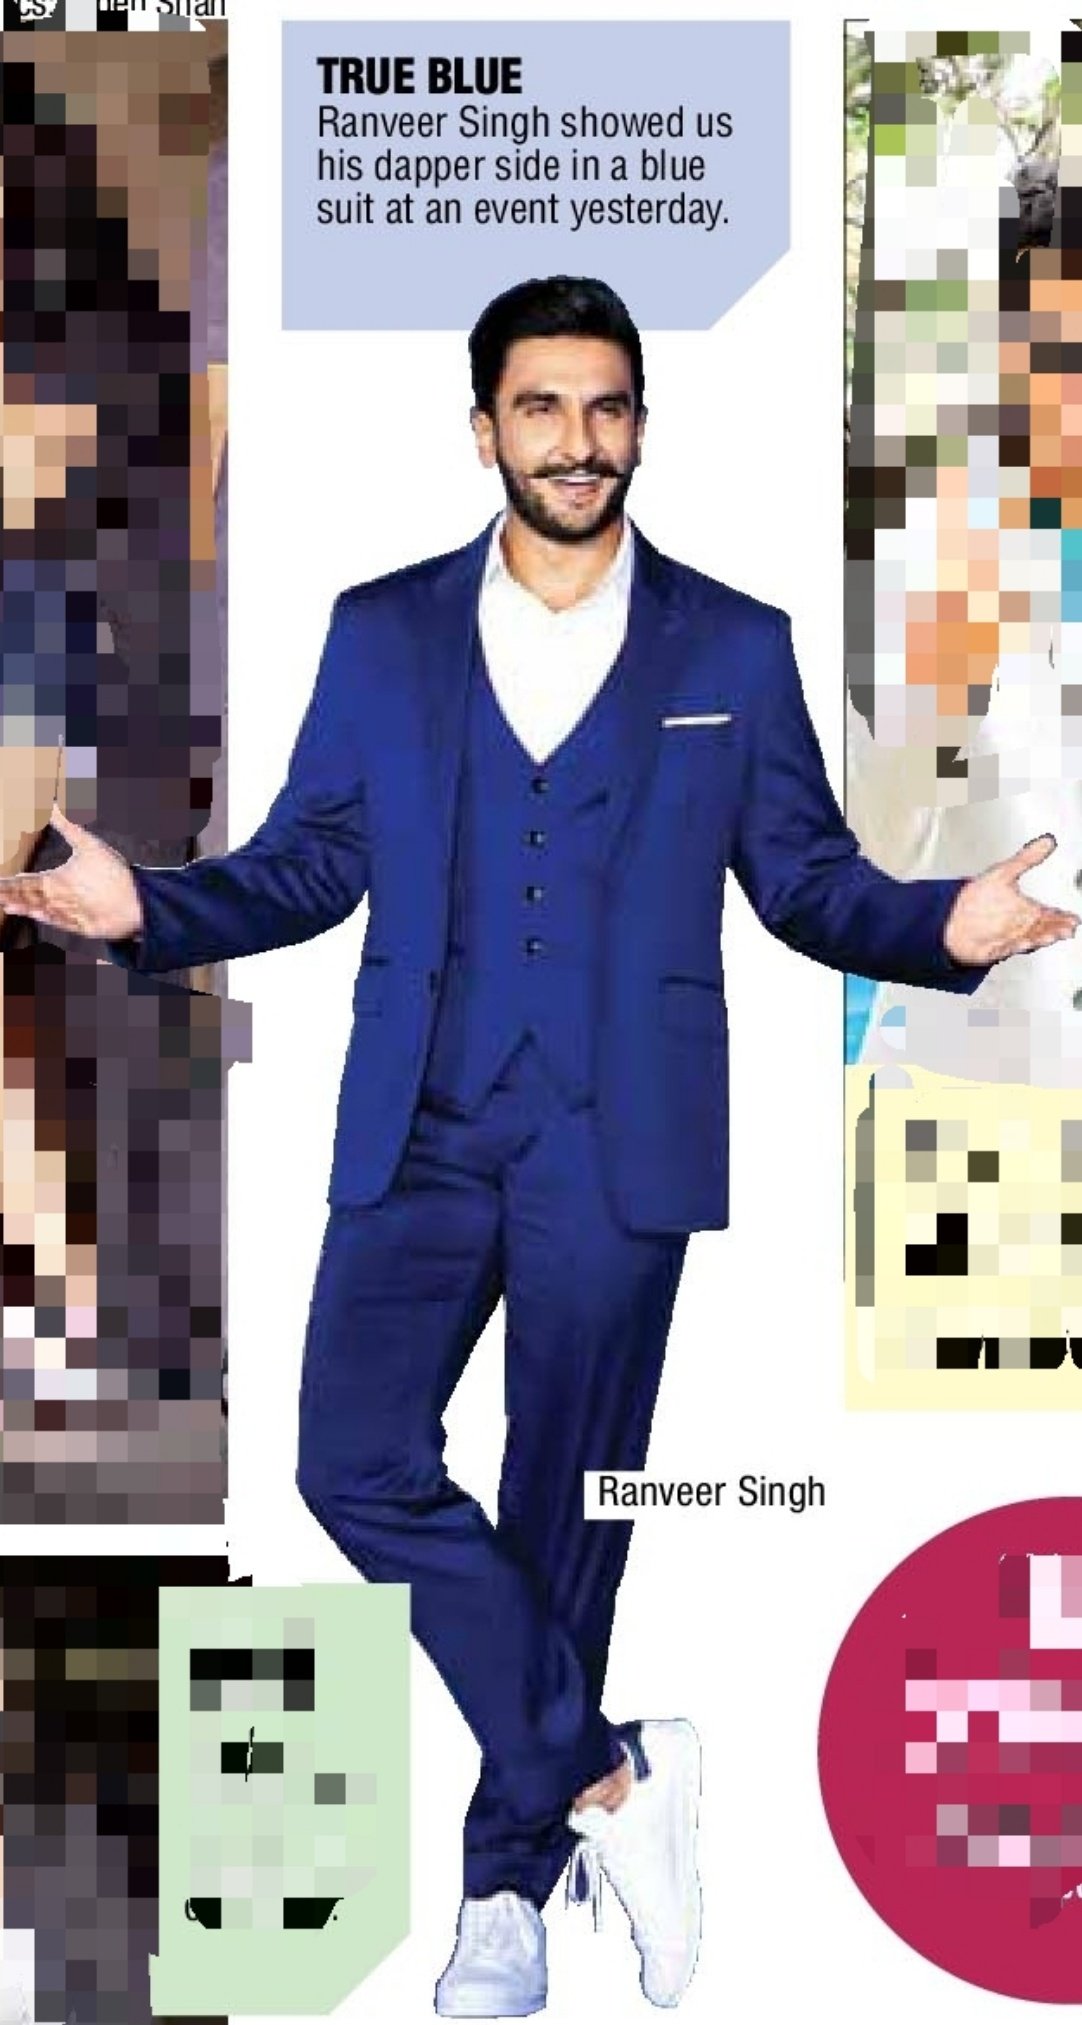 HELLO! India - Ranveer Singh rocked a light blue suit with sunglasses for  Befikre promotions. What do you think of his look? #ranveersingh #bollywood  #befikre #style | Facebook